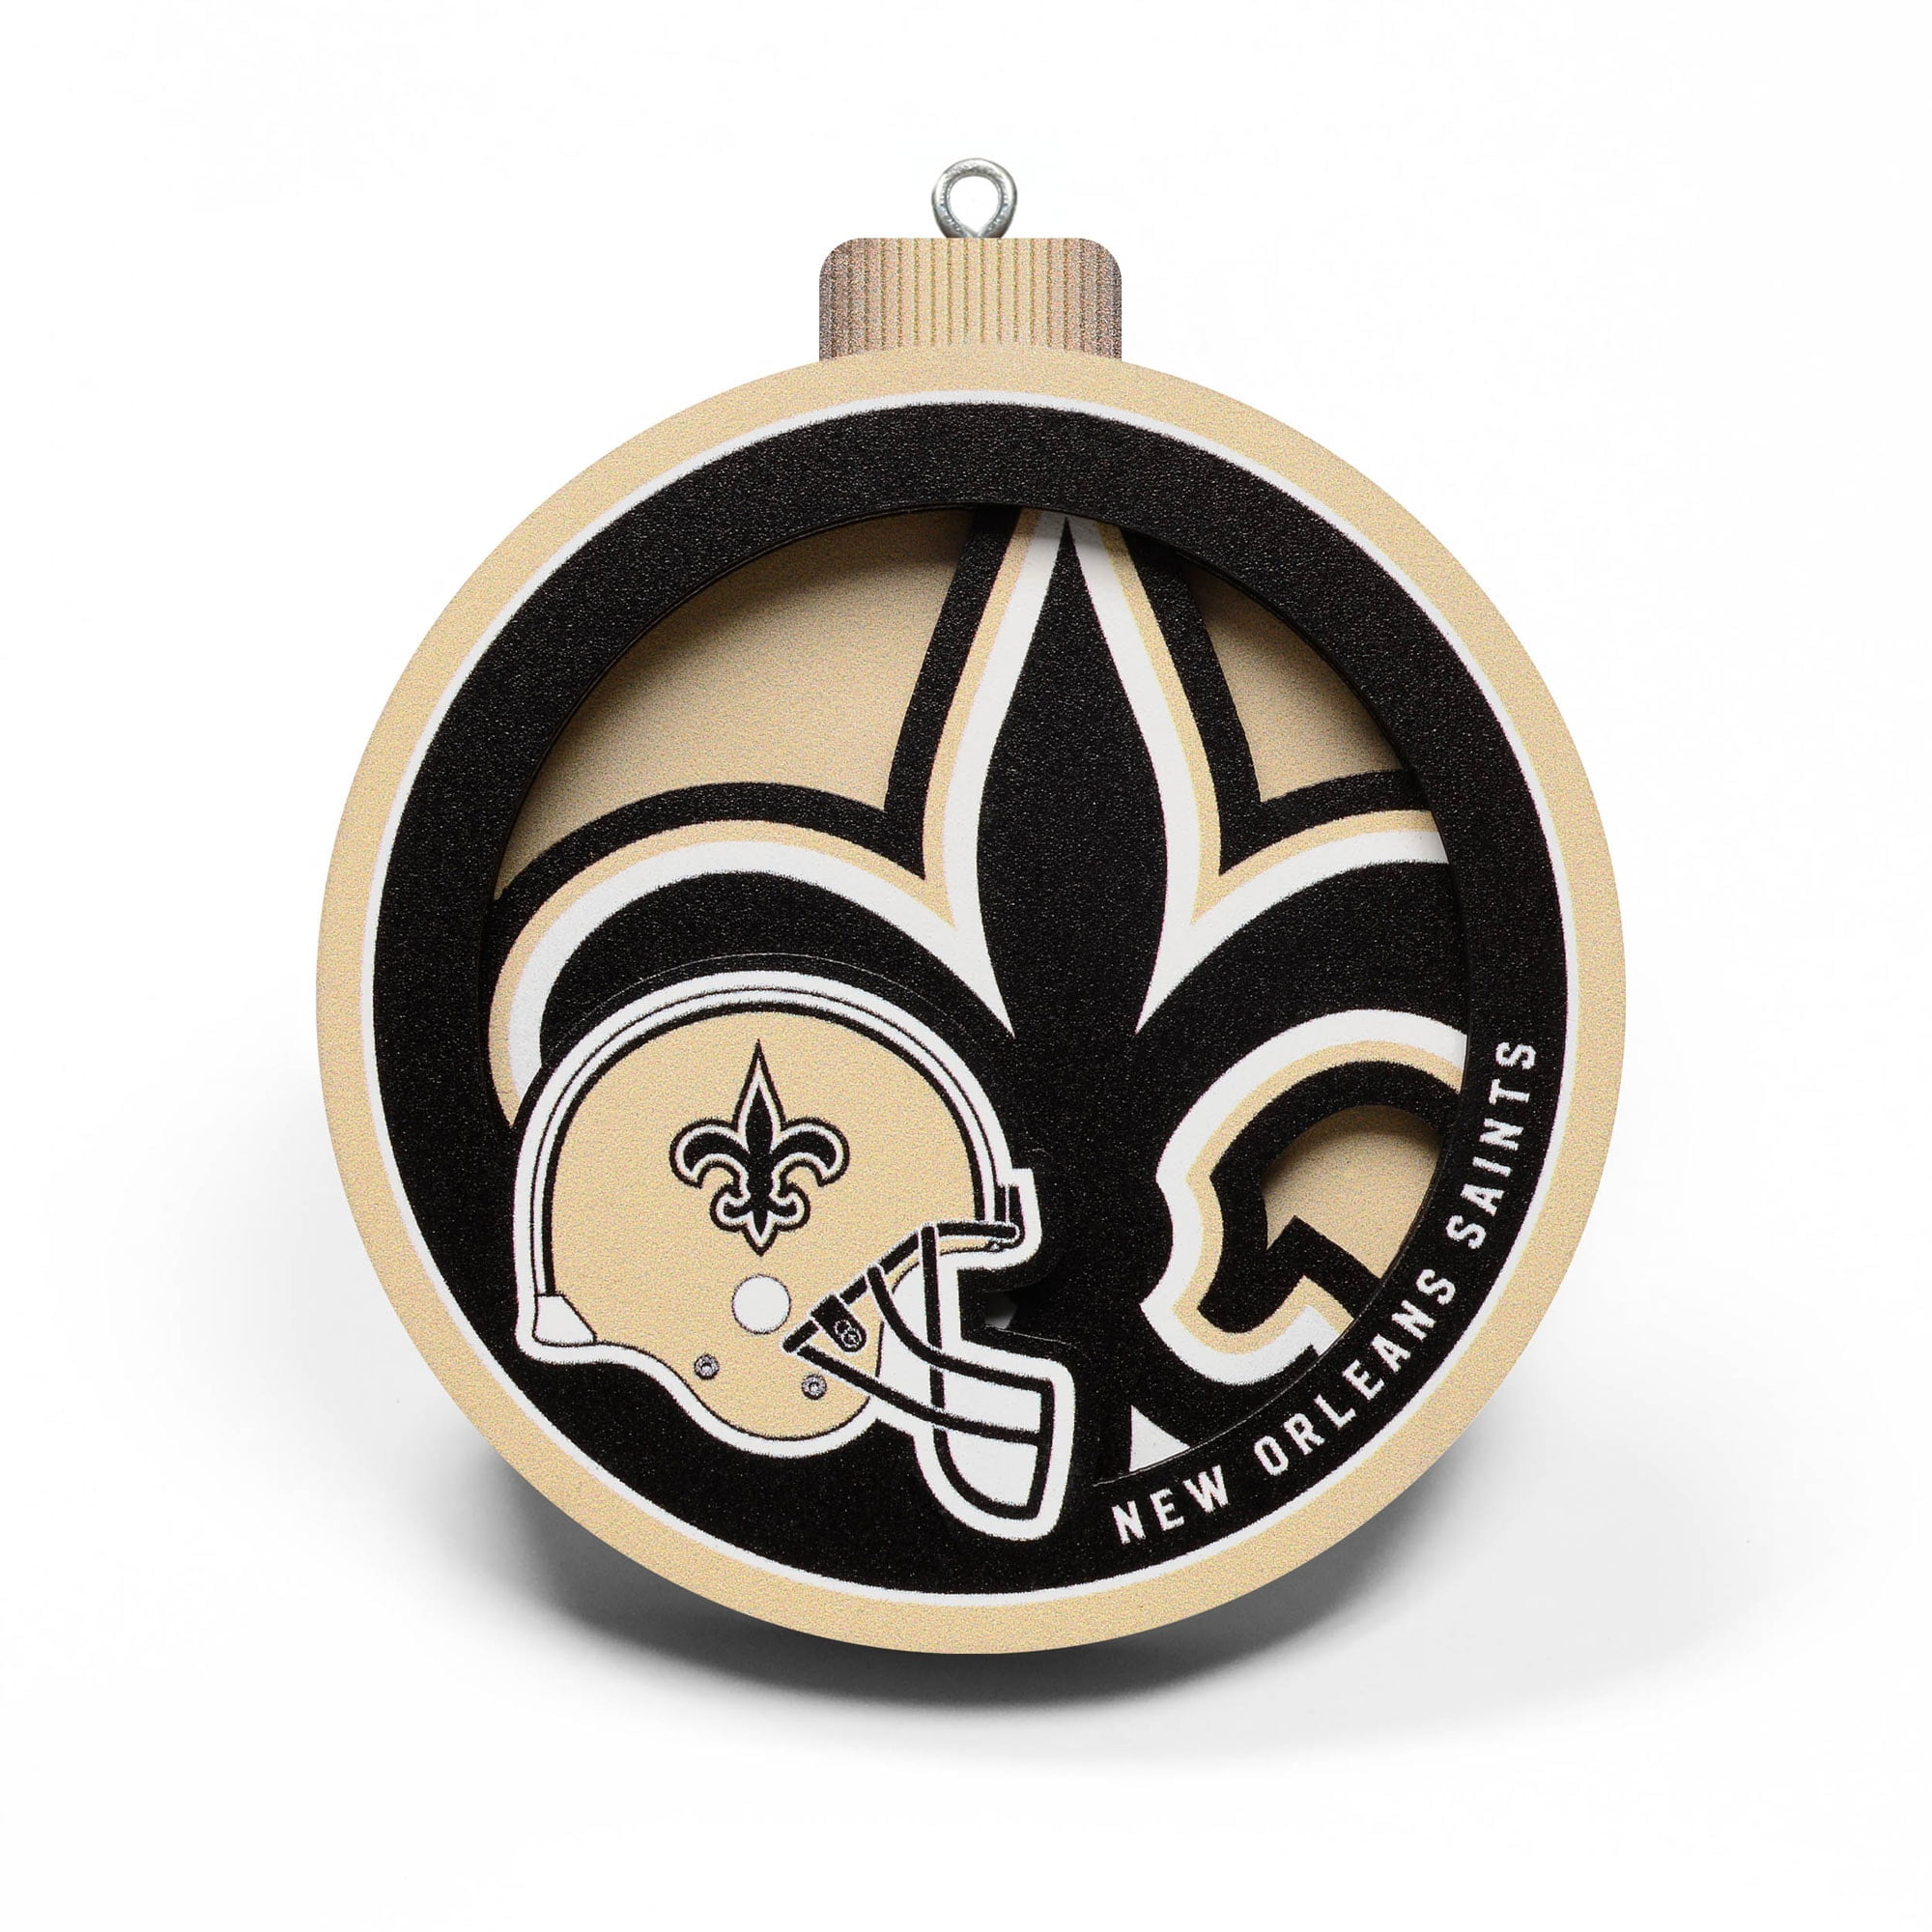 New Orleans Saints Snack Pack Ornament Set Officially Licensed Decorative Ornament for Sports Fans 